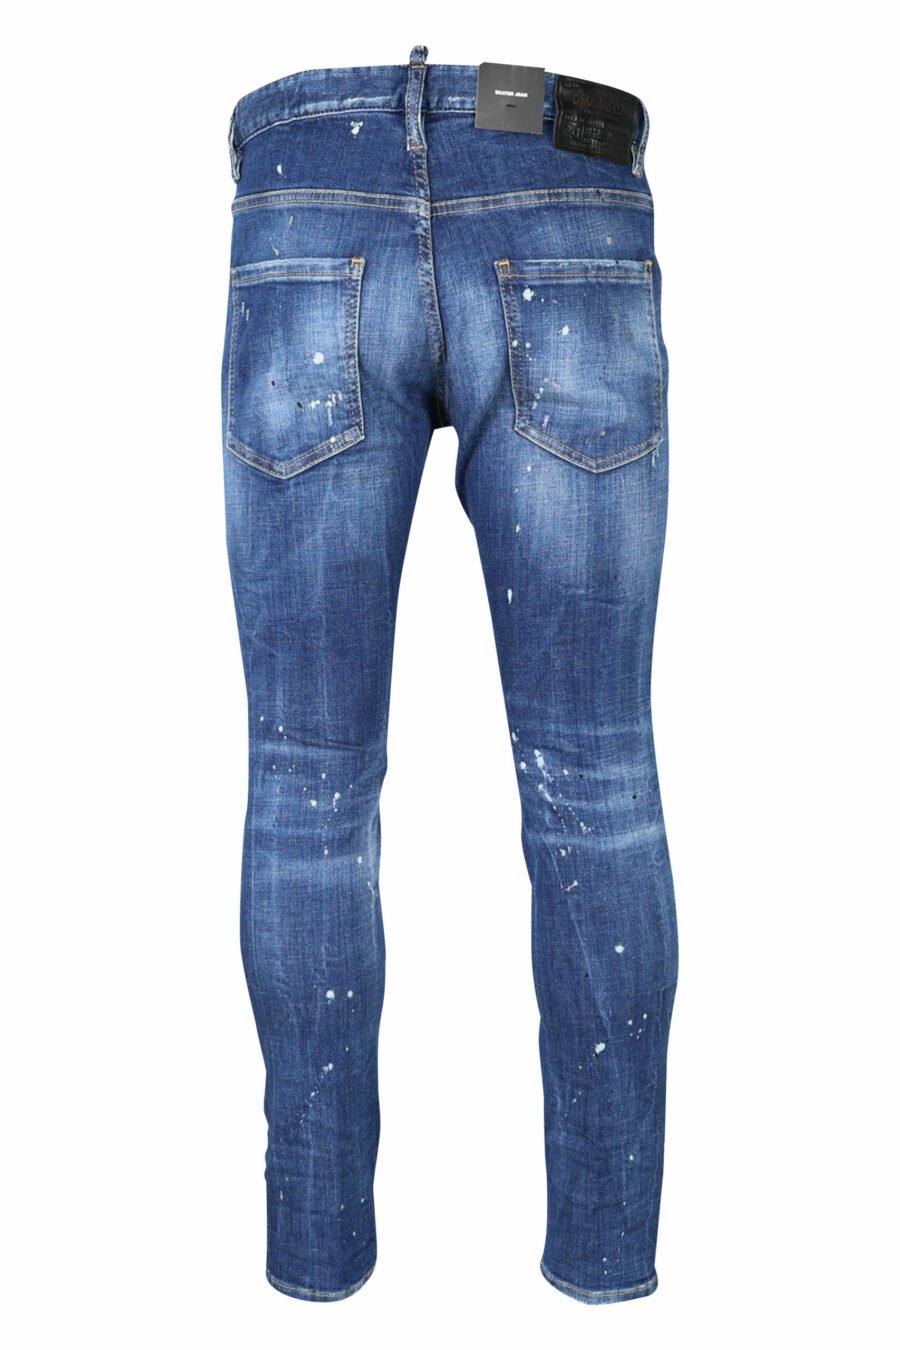 Jeans "super twinkey jean" blue frayed with black ripped - 8054148124328 2 scaled